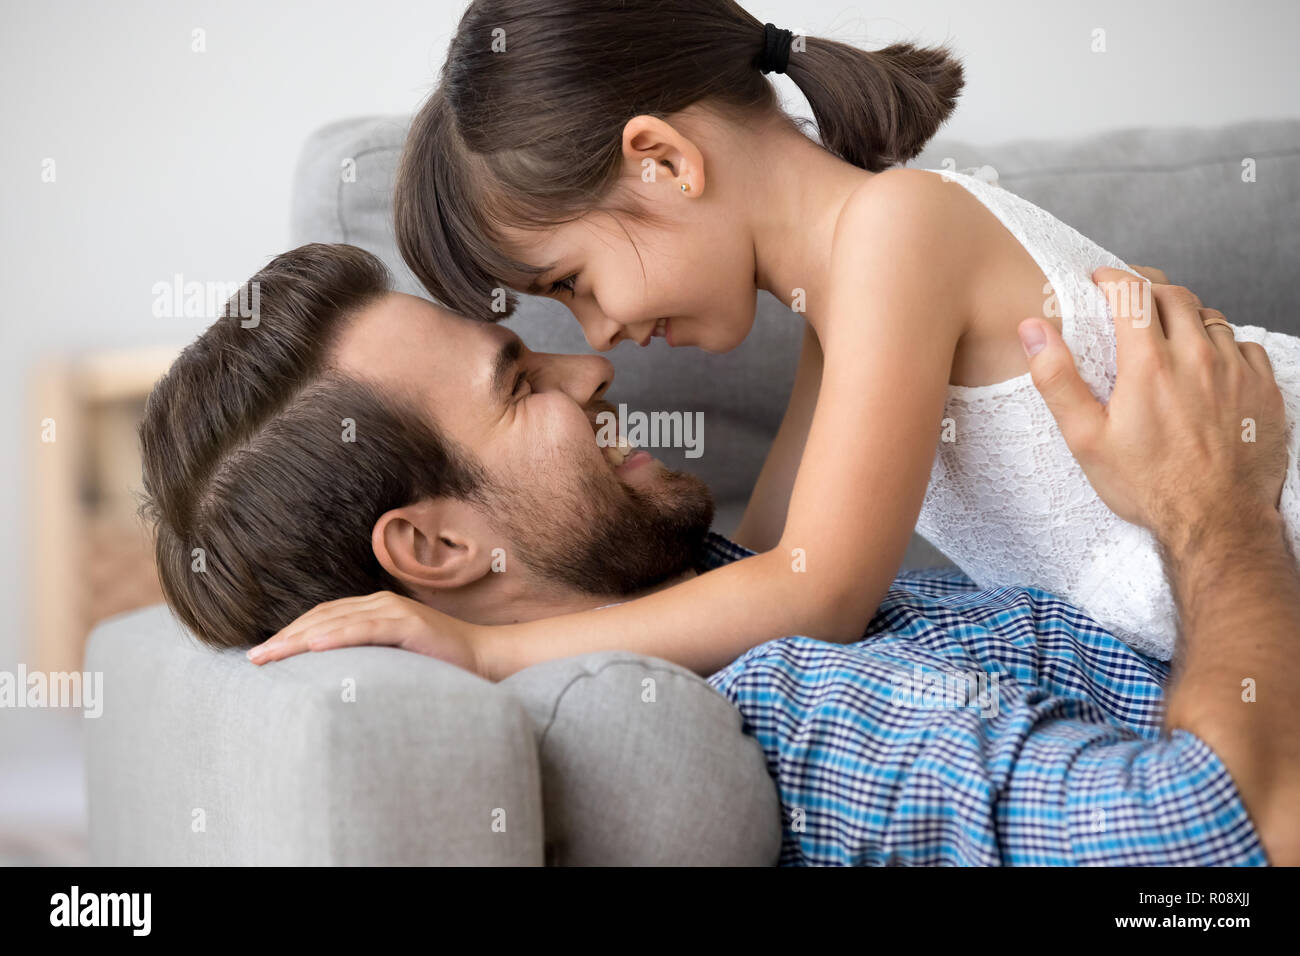 Daughter and father smiling lying together on couch Stock Photo